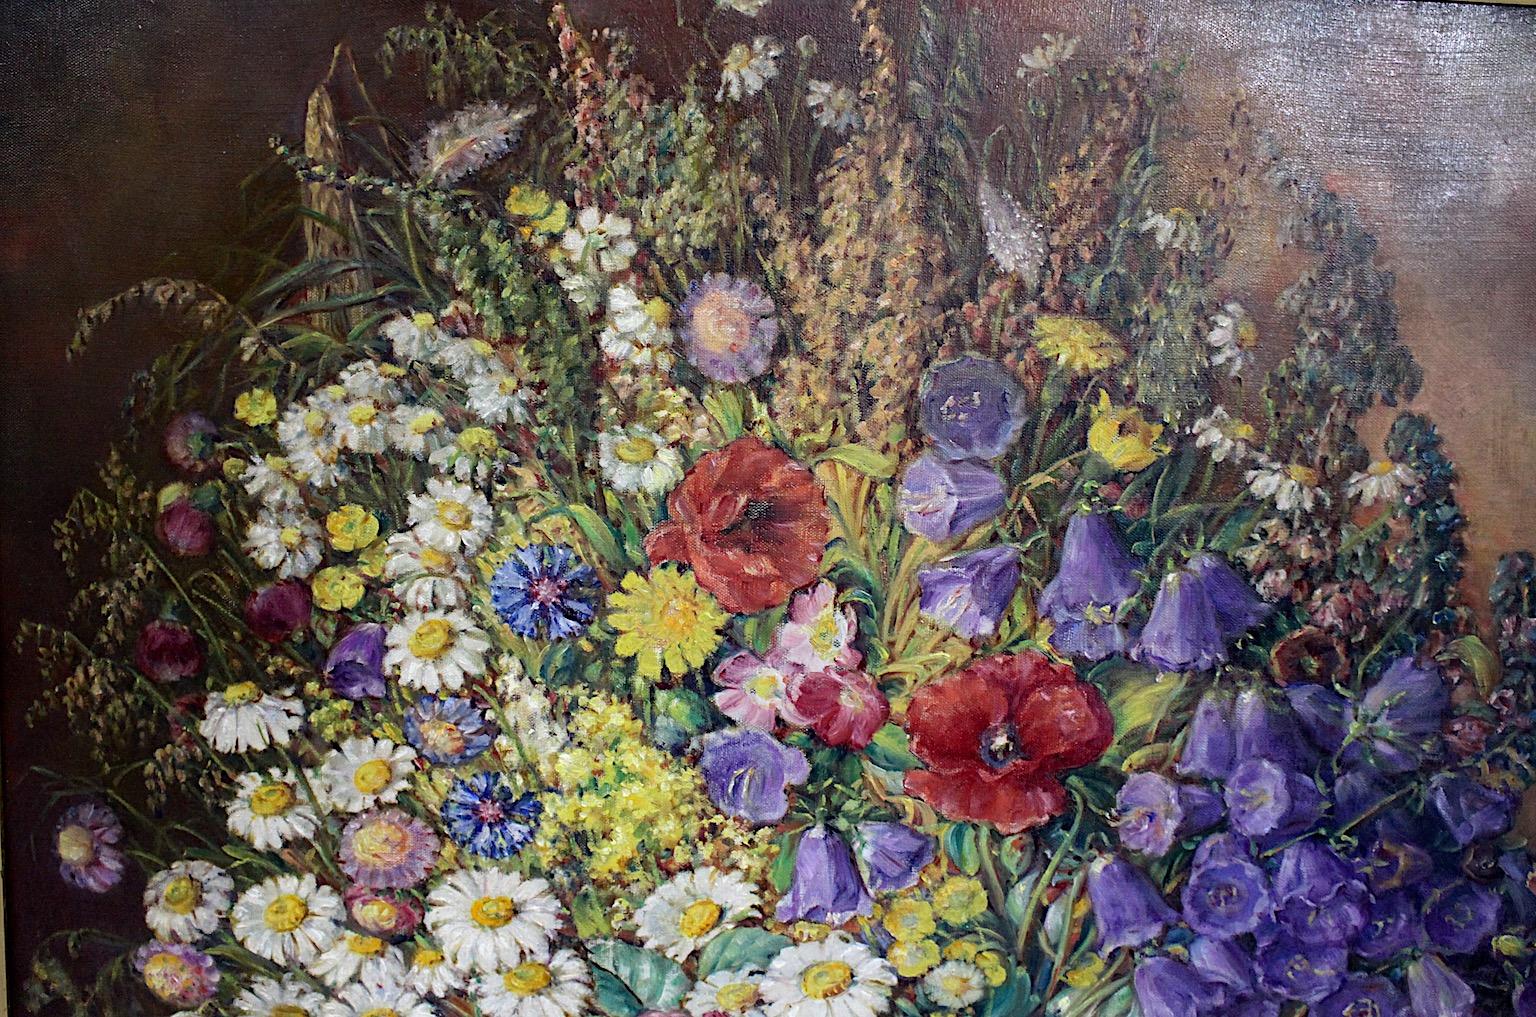 Art Deco authentic vintage painting motif huge field flower bunch in a vessel by Emil Fiala 1933, Vienna,.
A stunning painting by Emil Fiala created 1933 Vienna with a charming motif in huge size showing a Field Flower Bunch in a vessel.
This